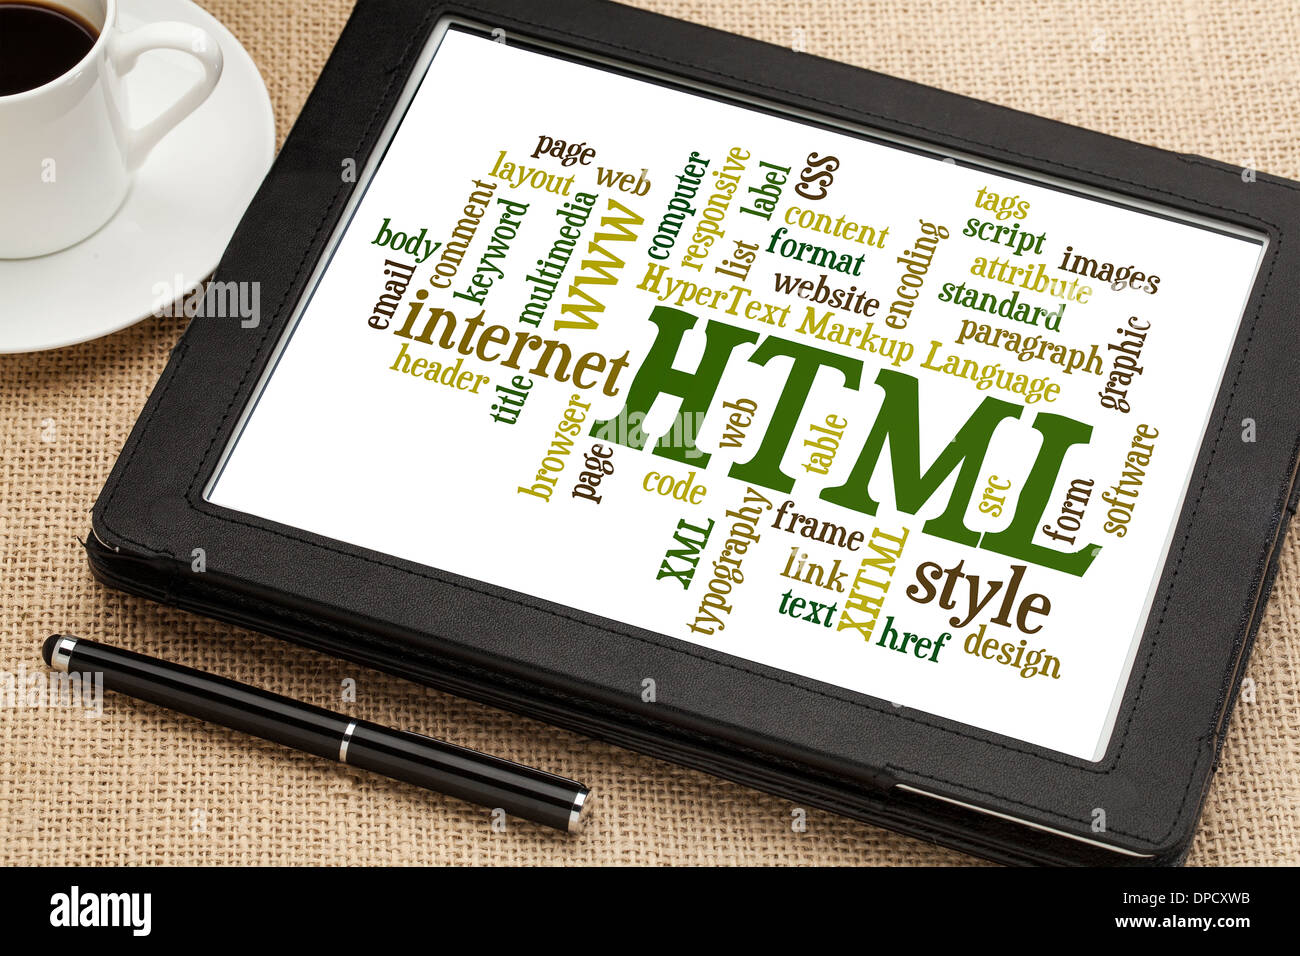 html (hypertext markup language) word cloud on a digital tablet with a cup of coffee Stock Photo